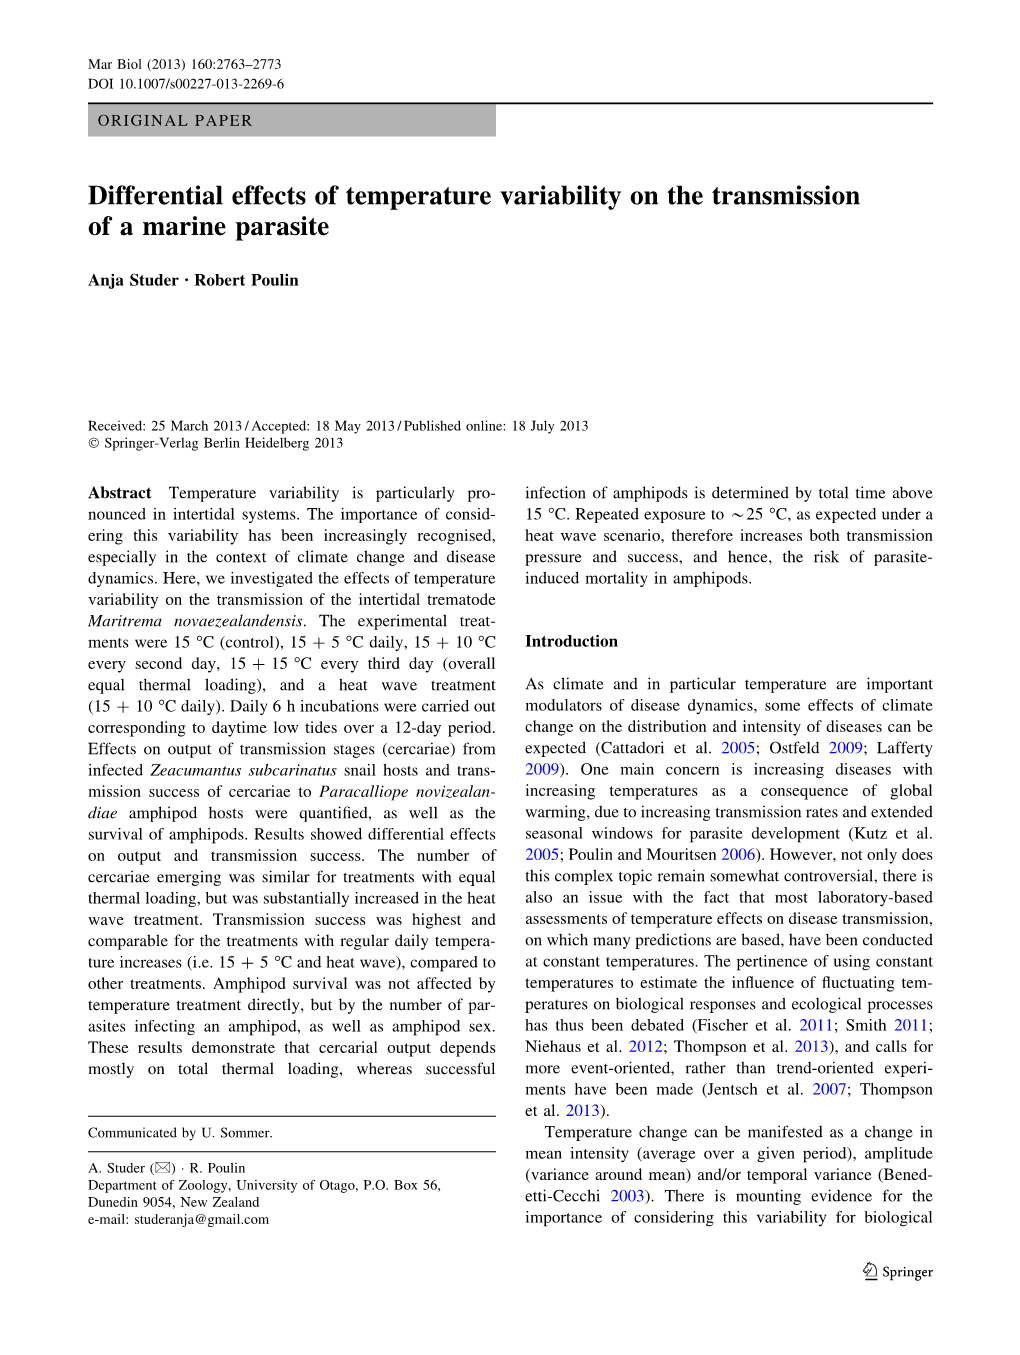 Differential Effects of Temperature Variability on the Transmission of a Marine Parasite